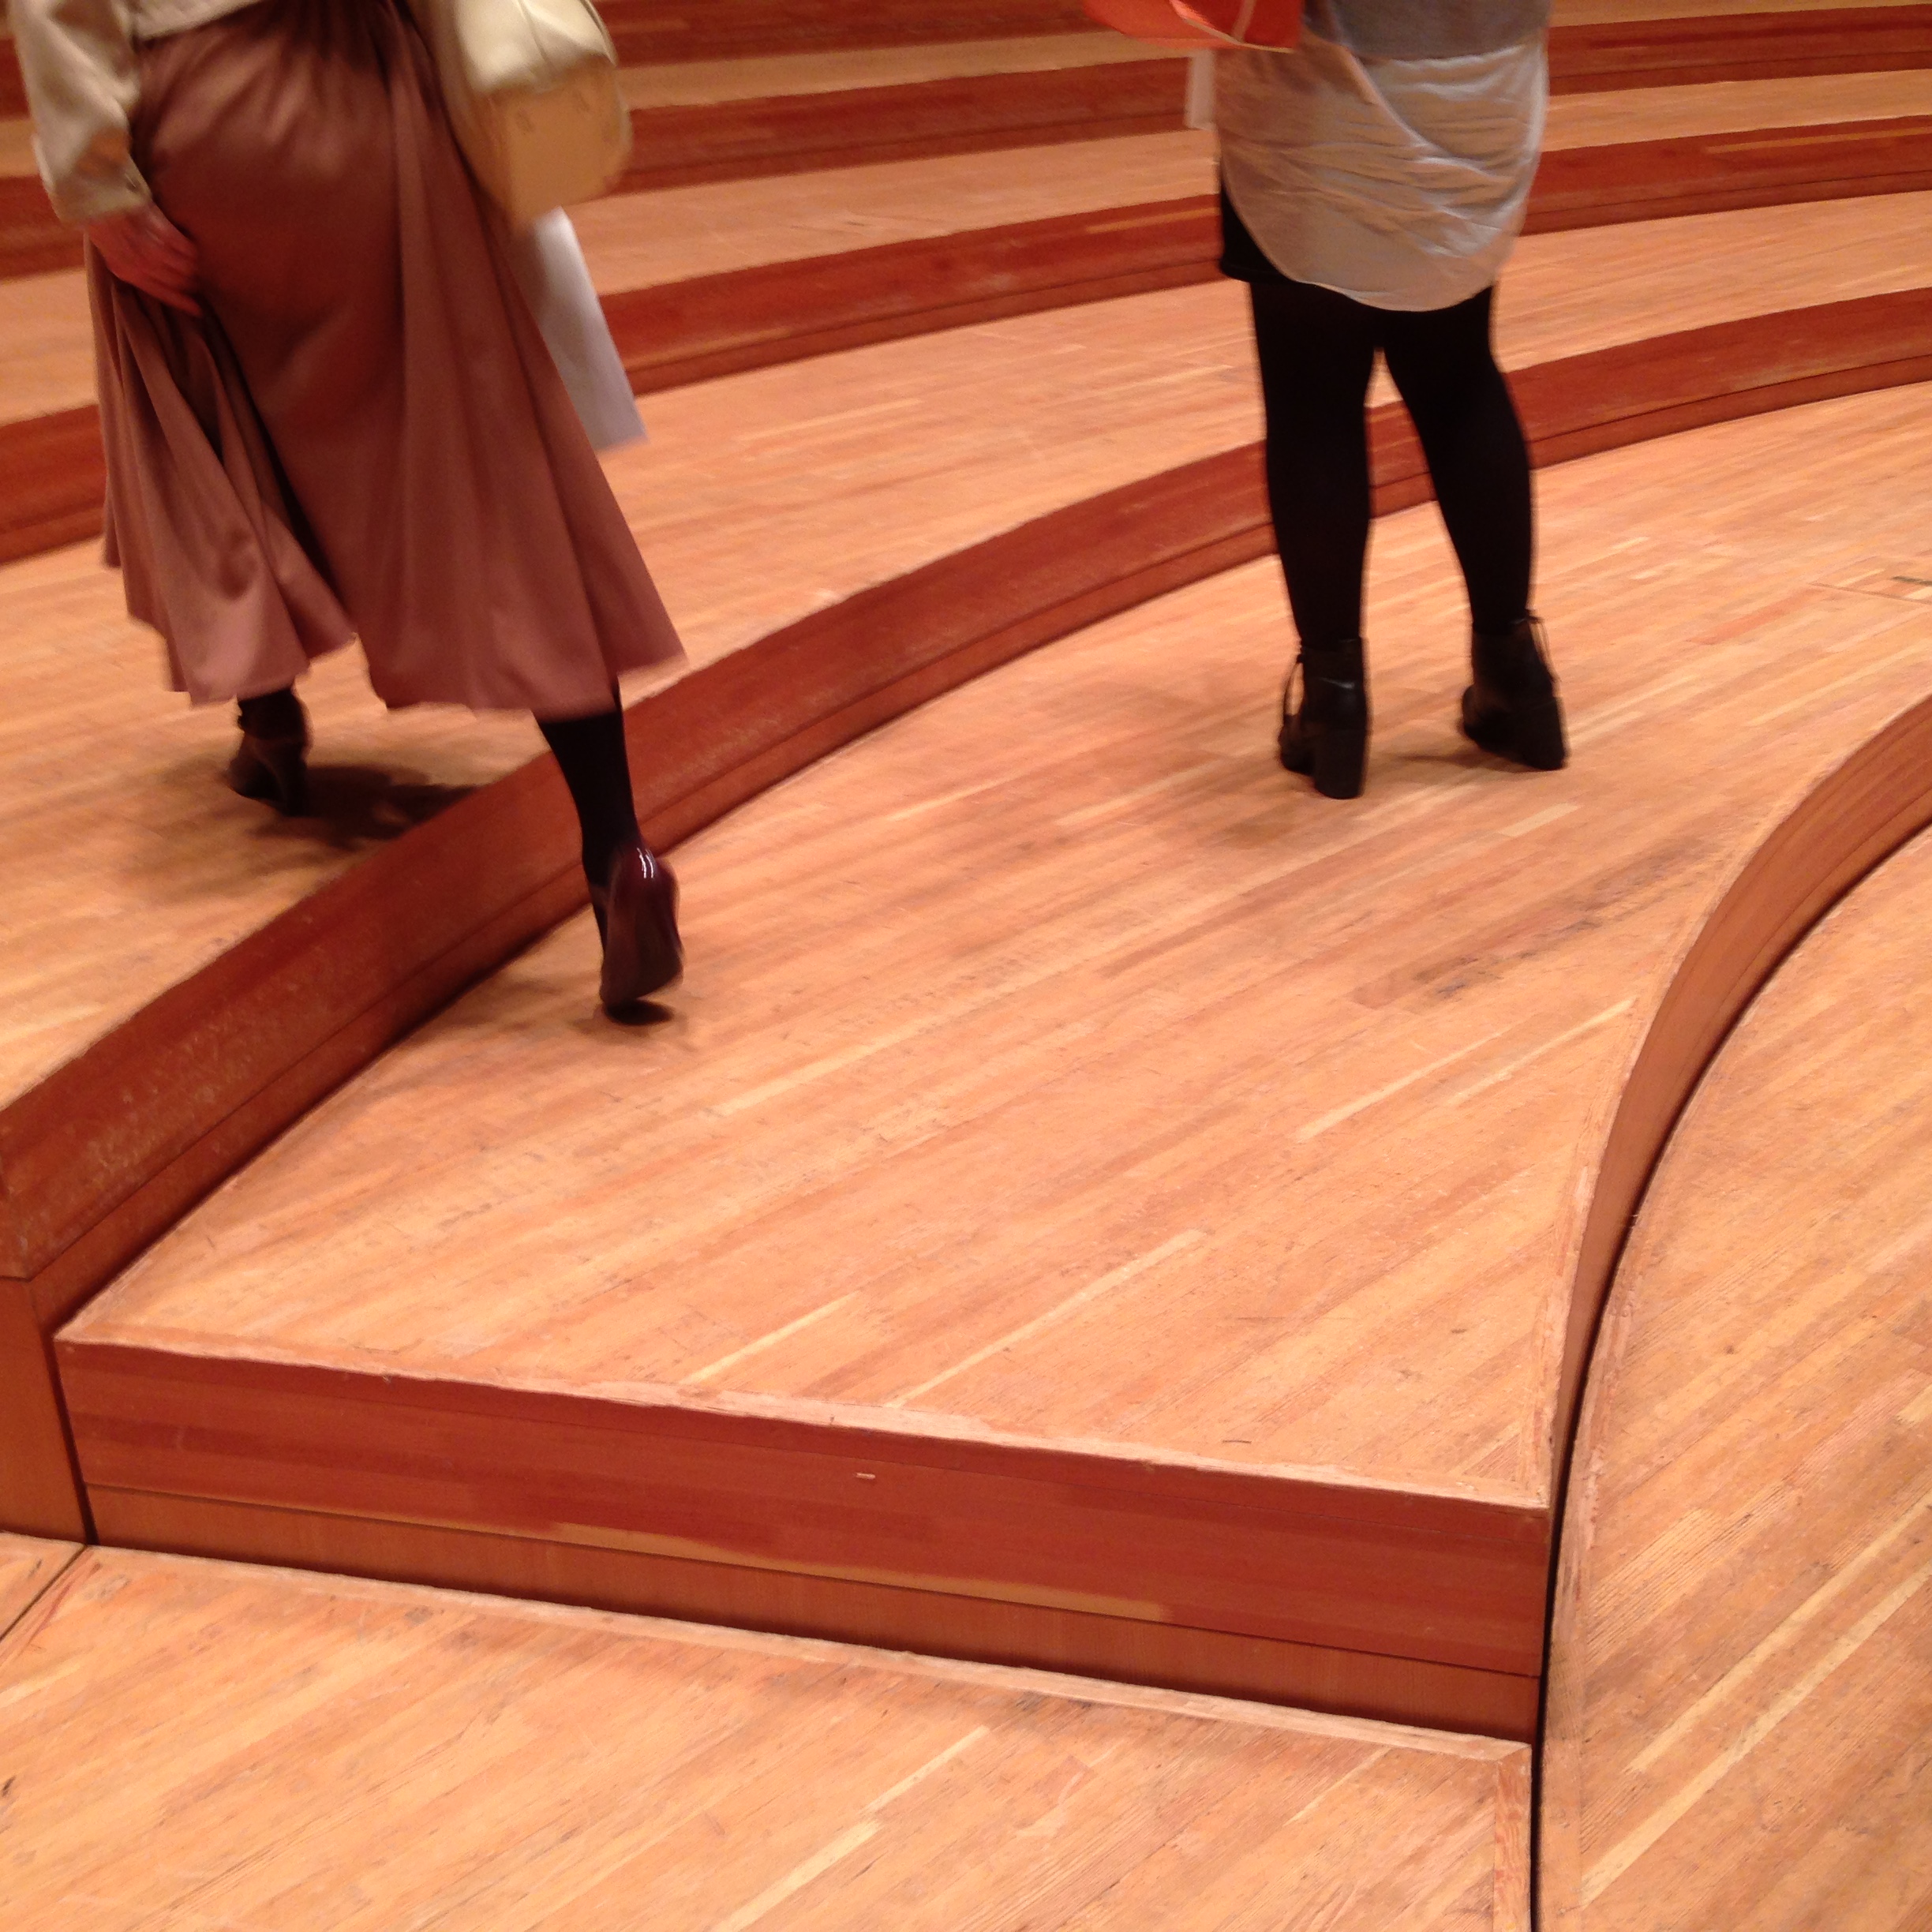 Stage of Suntory Hall in Tokyo